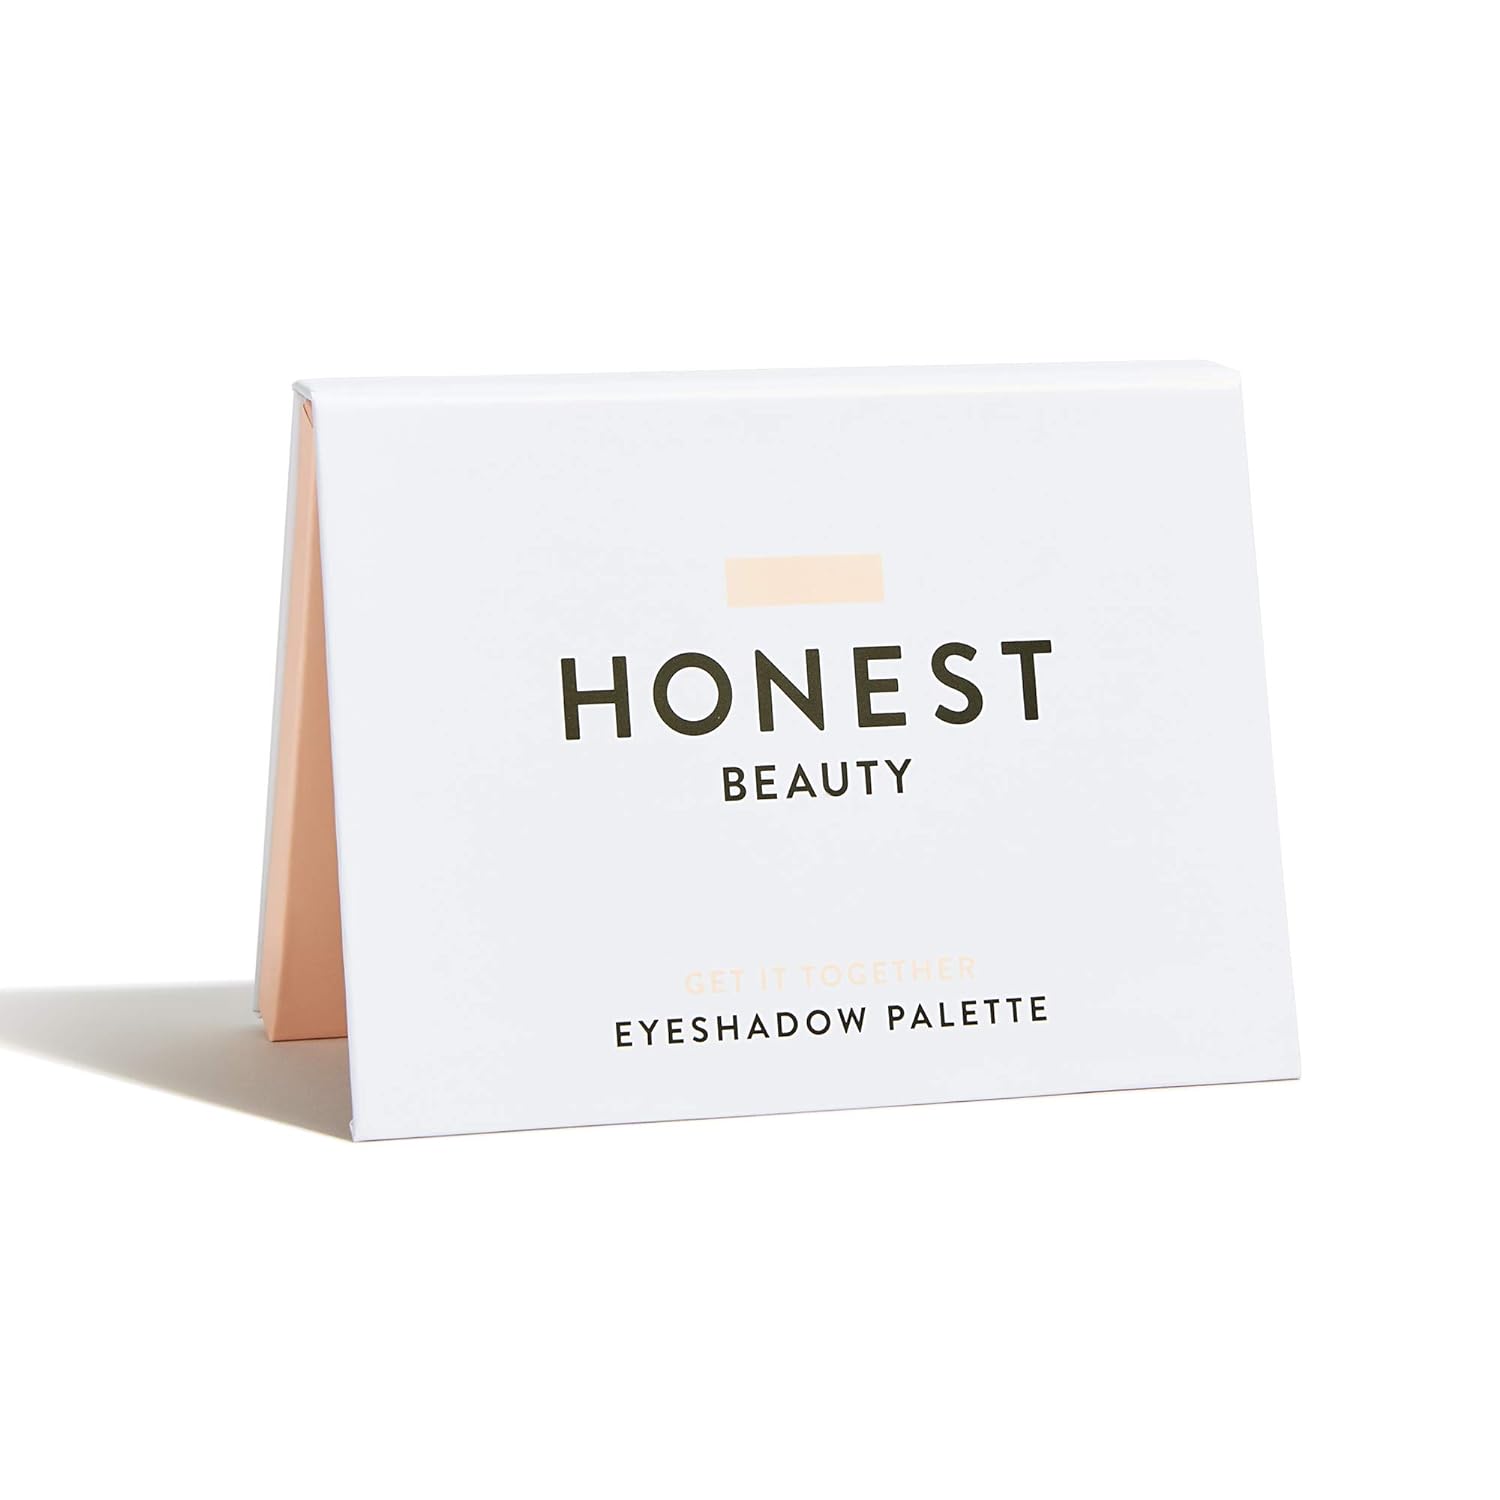  Honest Beauty Eyeshadow Palette with 10 Pigment-Rich Shades | Paraben Free, Talc Free, Dermatologist Tested & Cruelty Free | 0.67 oz.